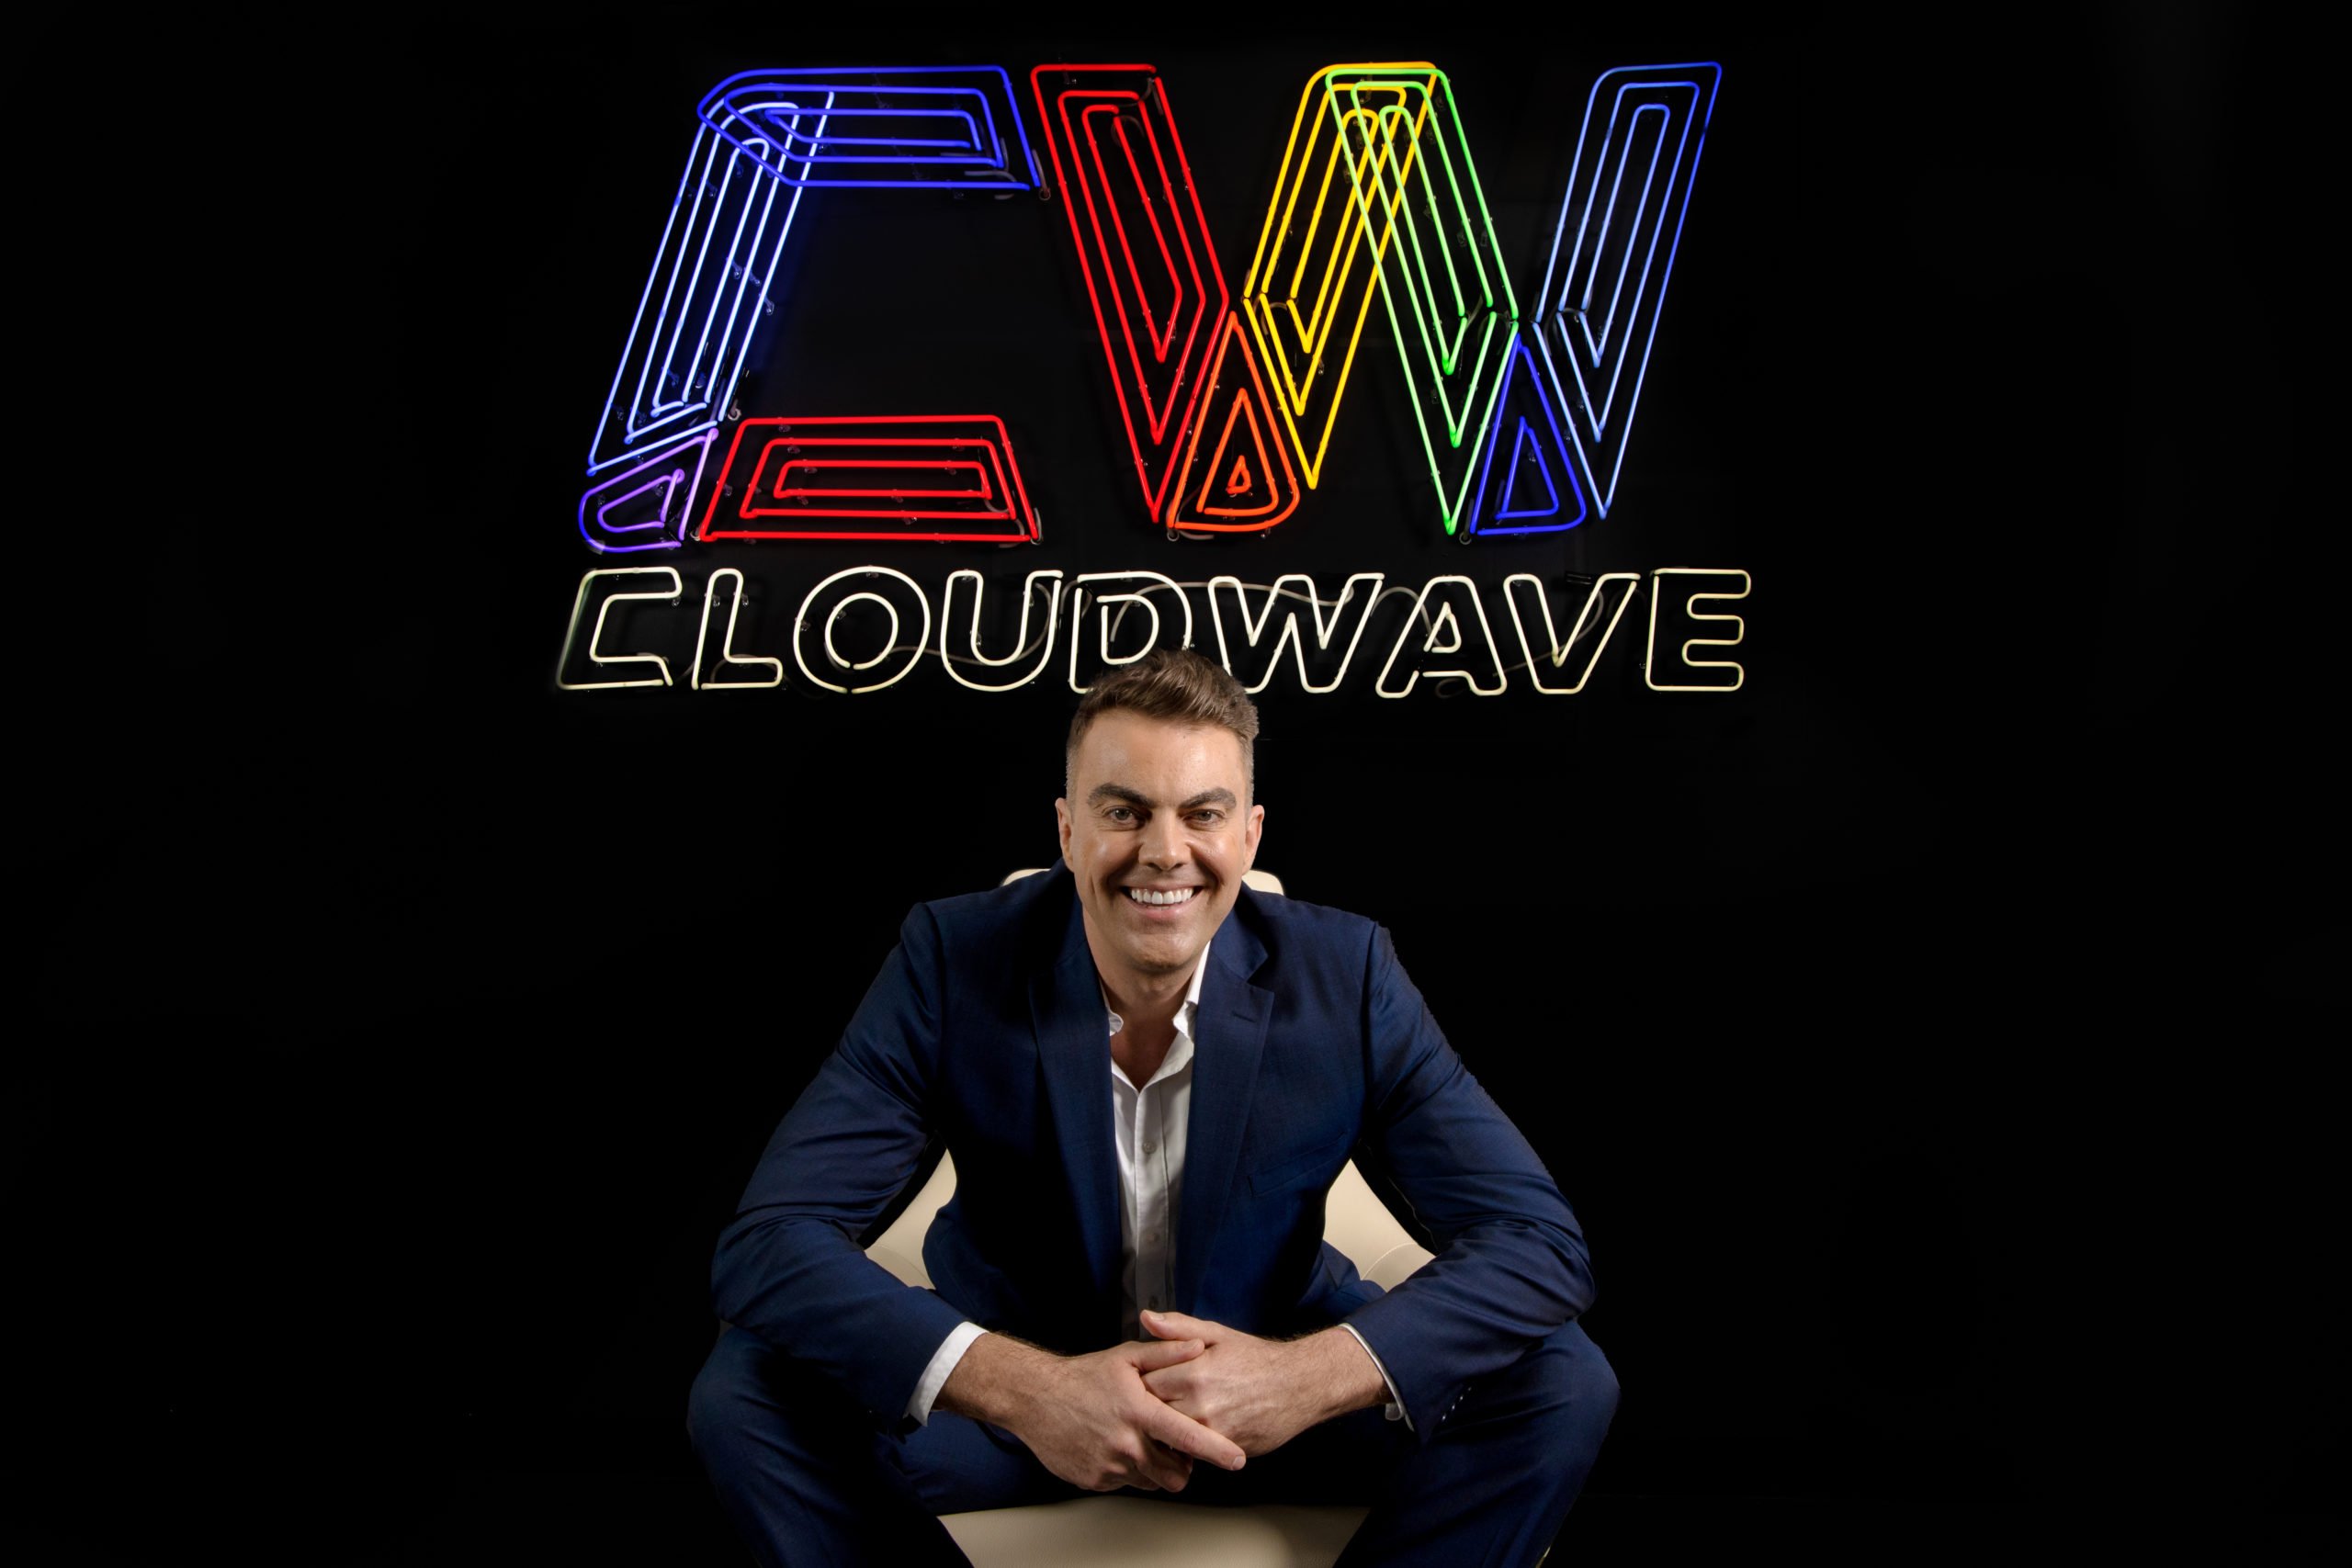 Mike Powrie, founder, CloudWave